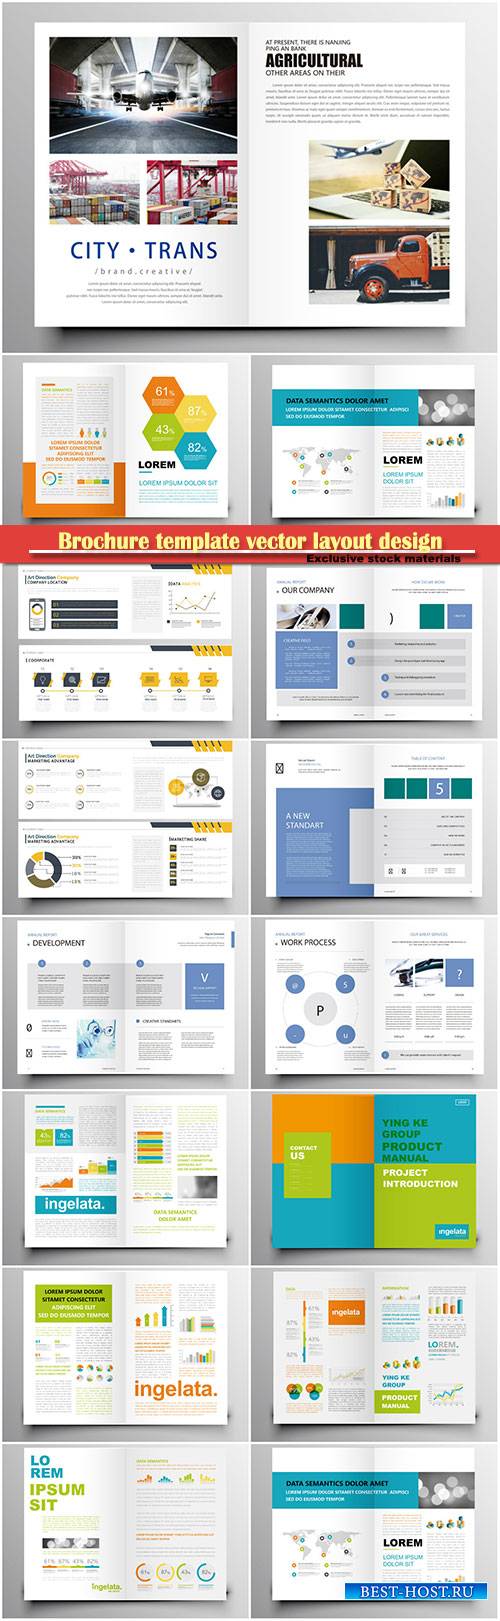 Brochure template vector layout design, corporate business annual report, magazine, flyer mockup # 133